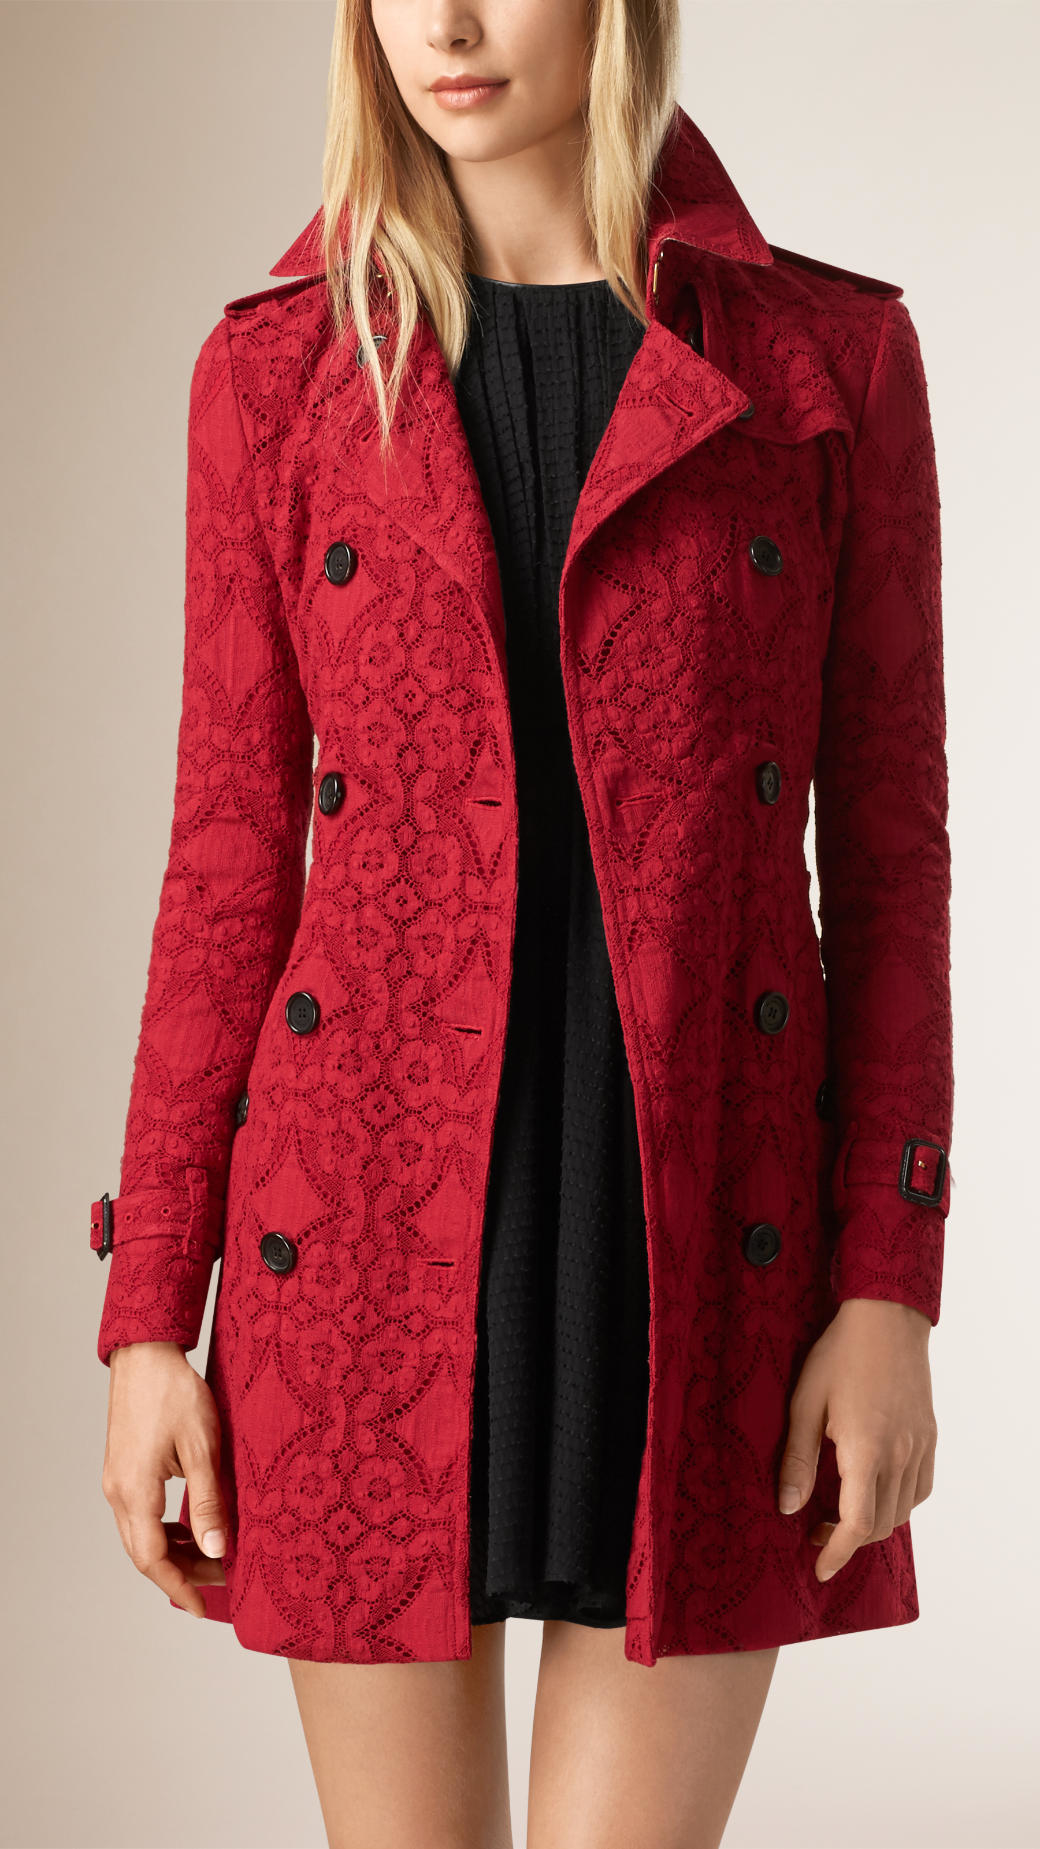 Lyst - Burberry Gabardine Lace Trench Coat in Red